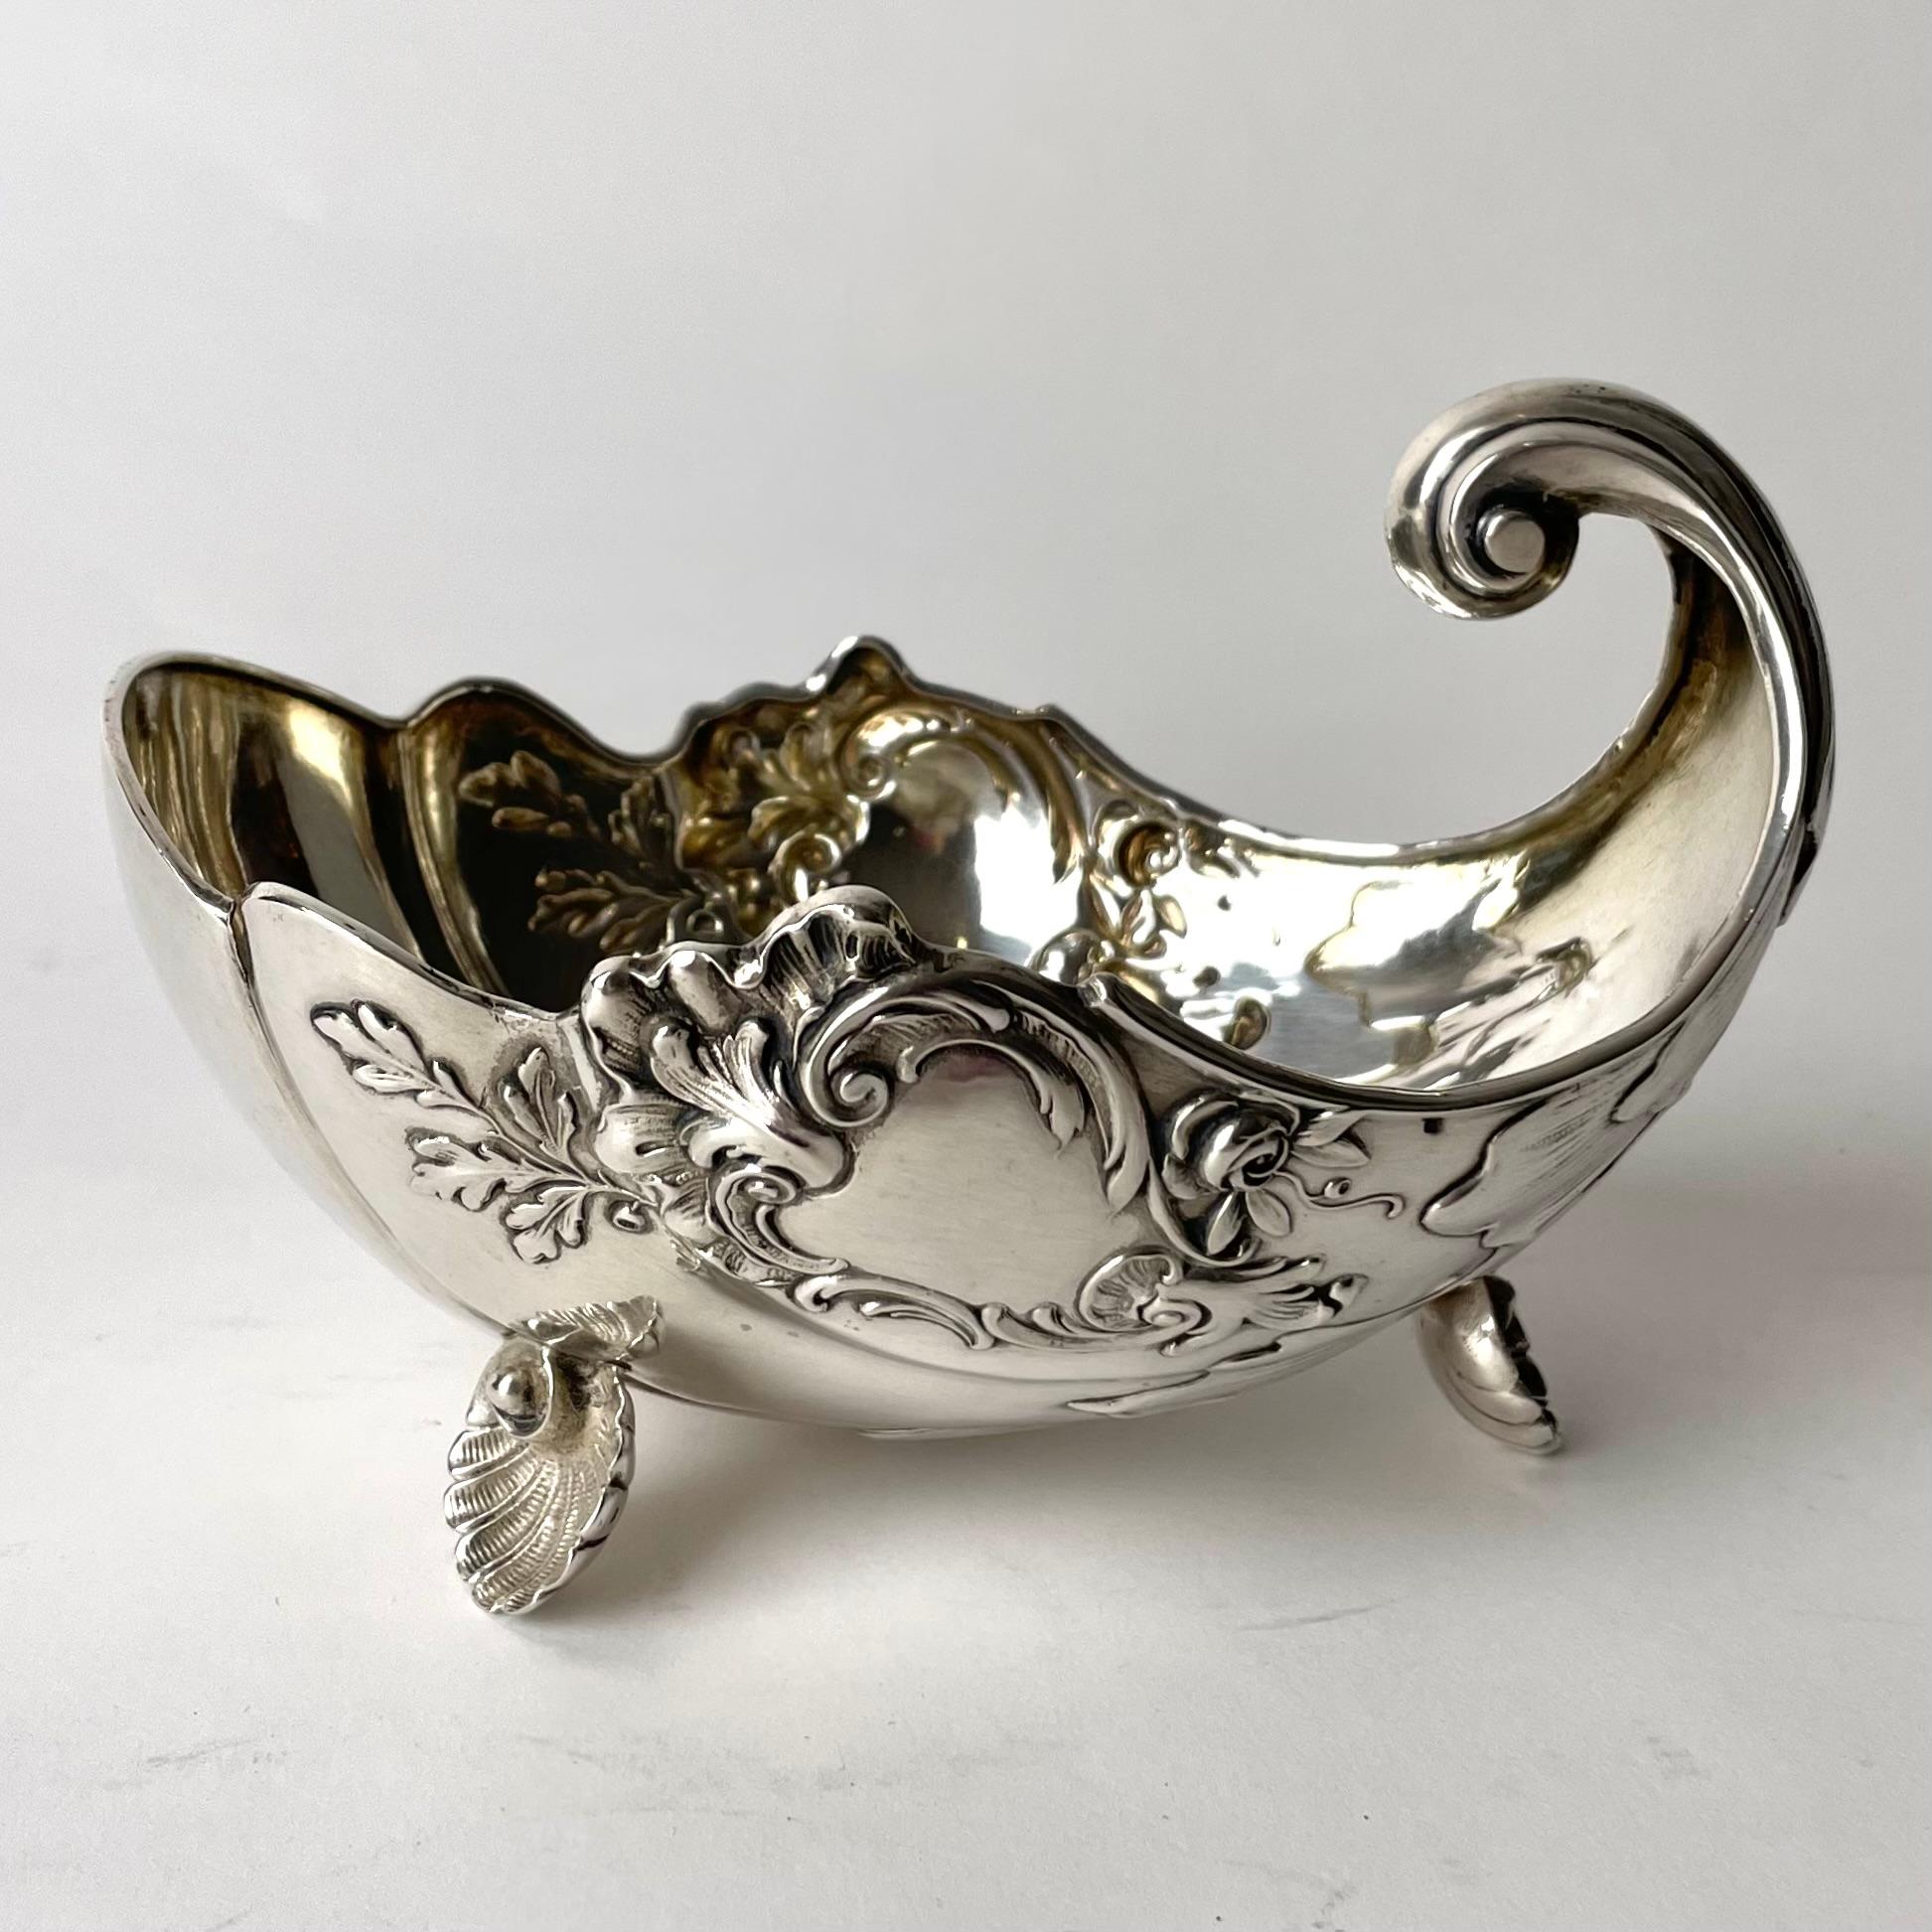 Rococo Revival Beautiful Candy Bowl in Silver in the shape of a seashell from Mid 19th Century For Sale